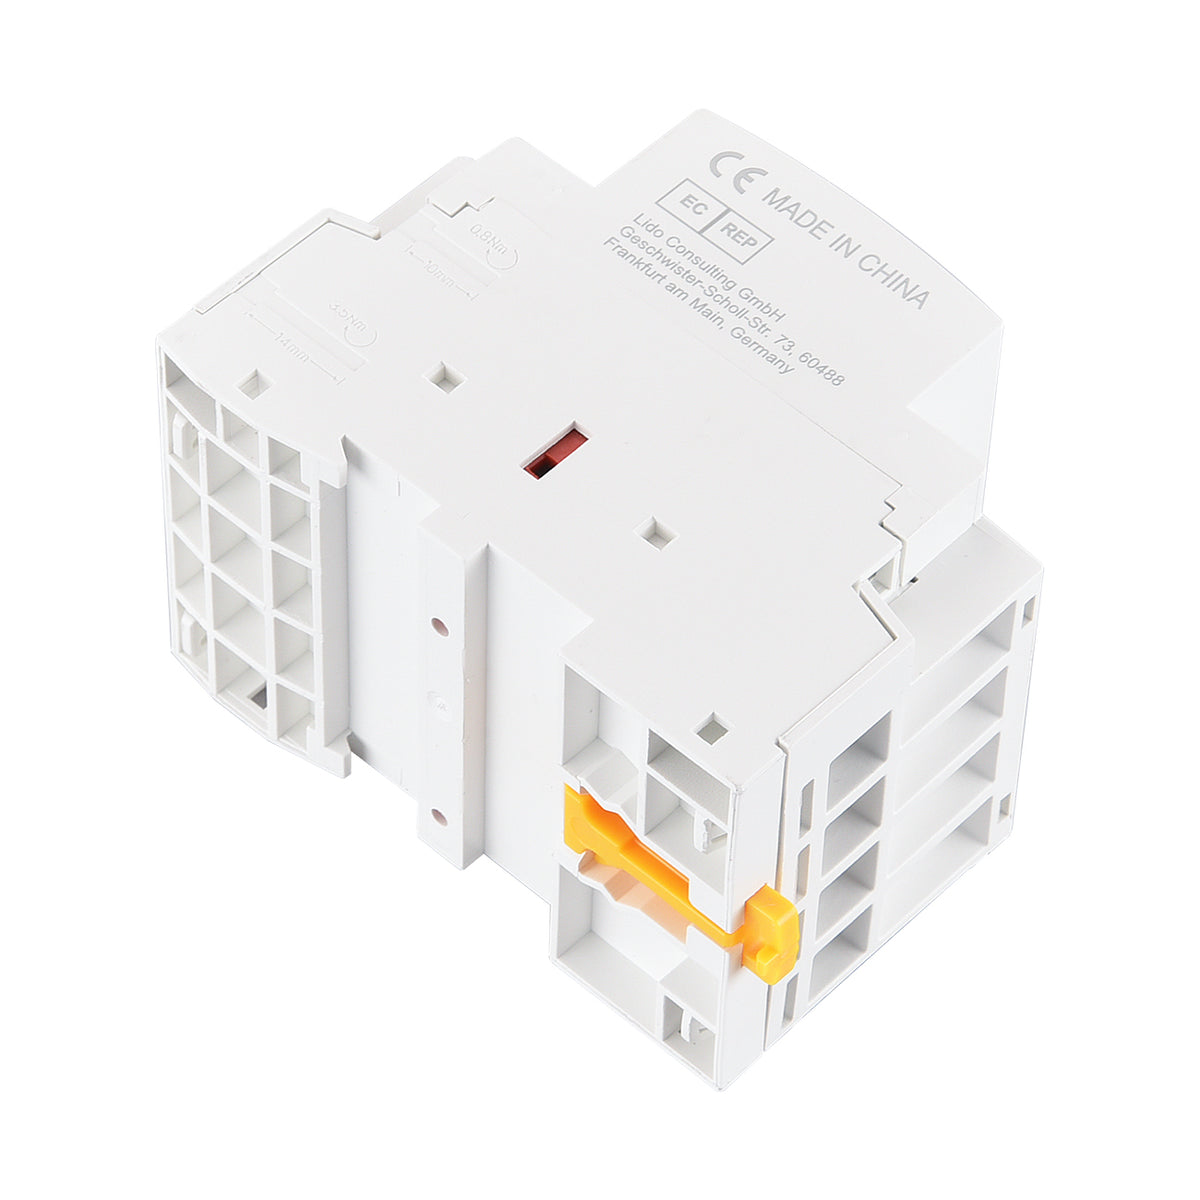 Household AC Contactor HSR1-25 2 Pole Two Normally Closed 220V/230V –  Heschen